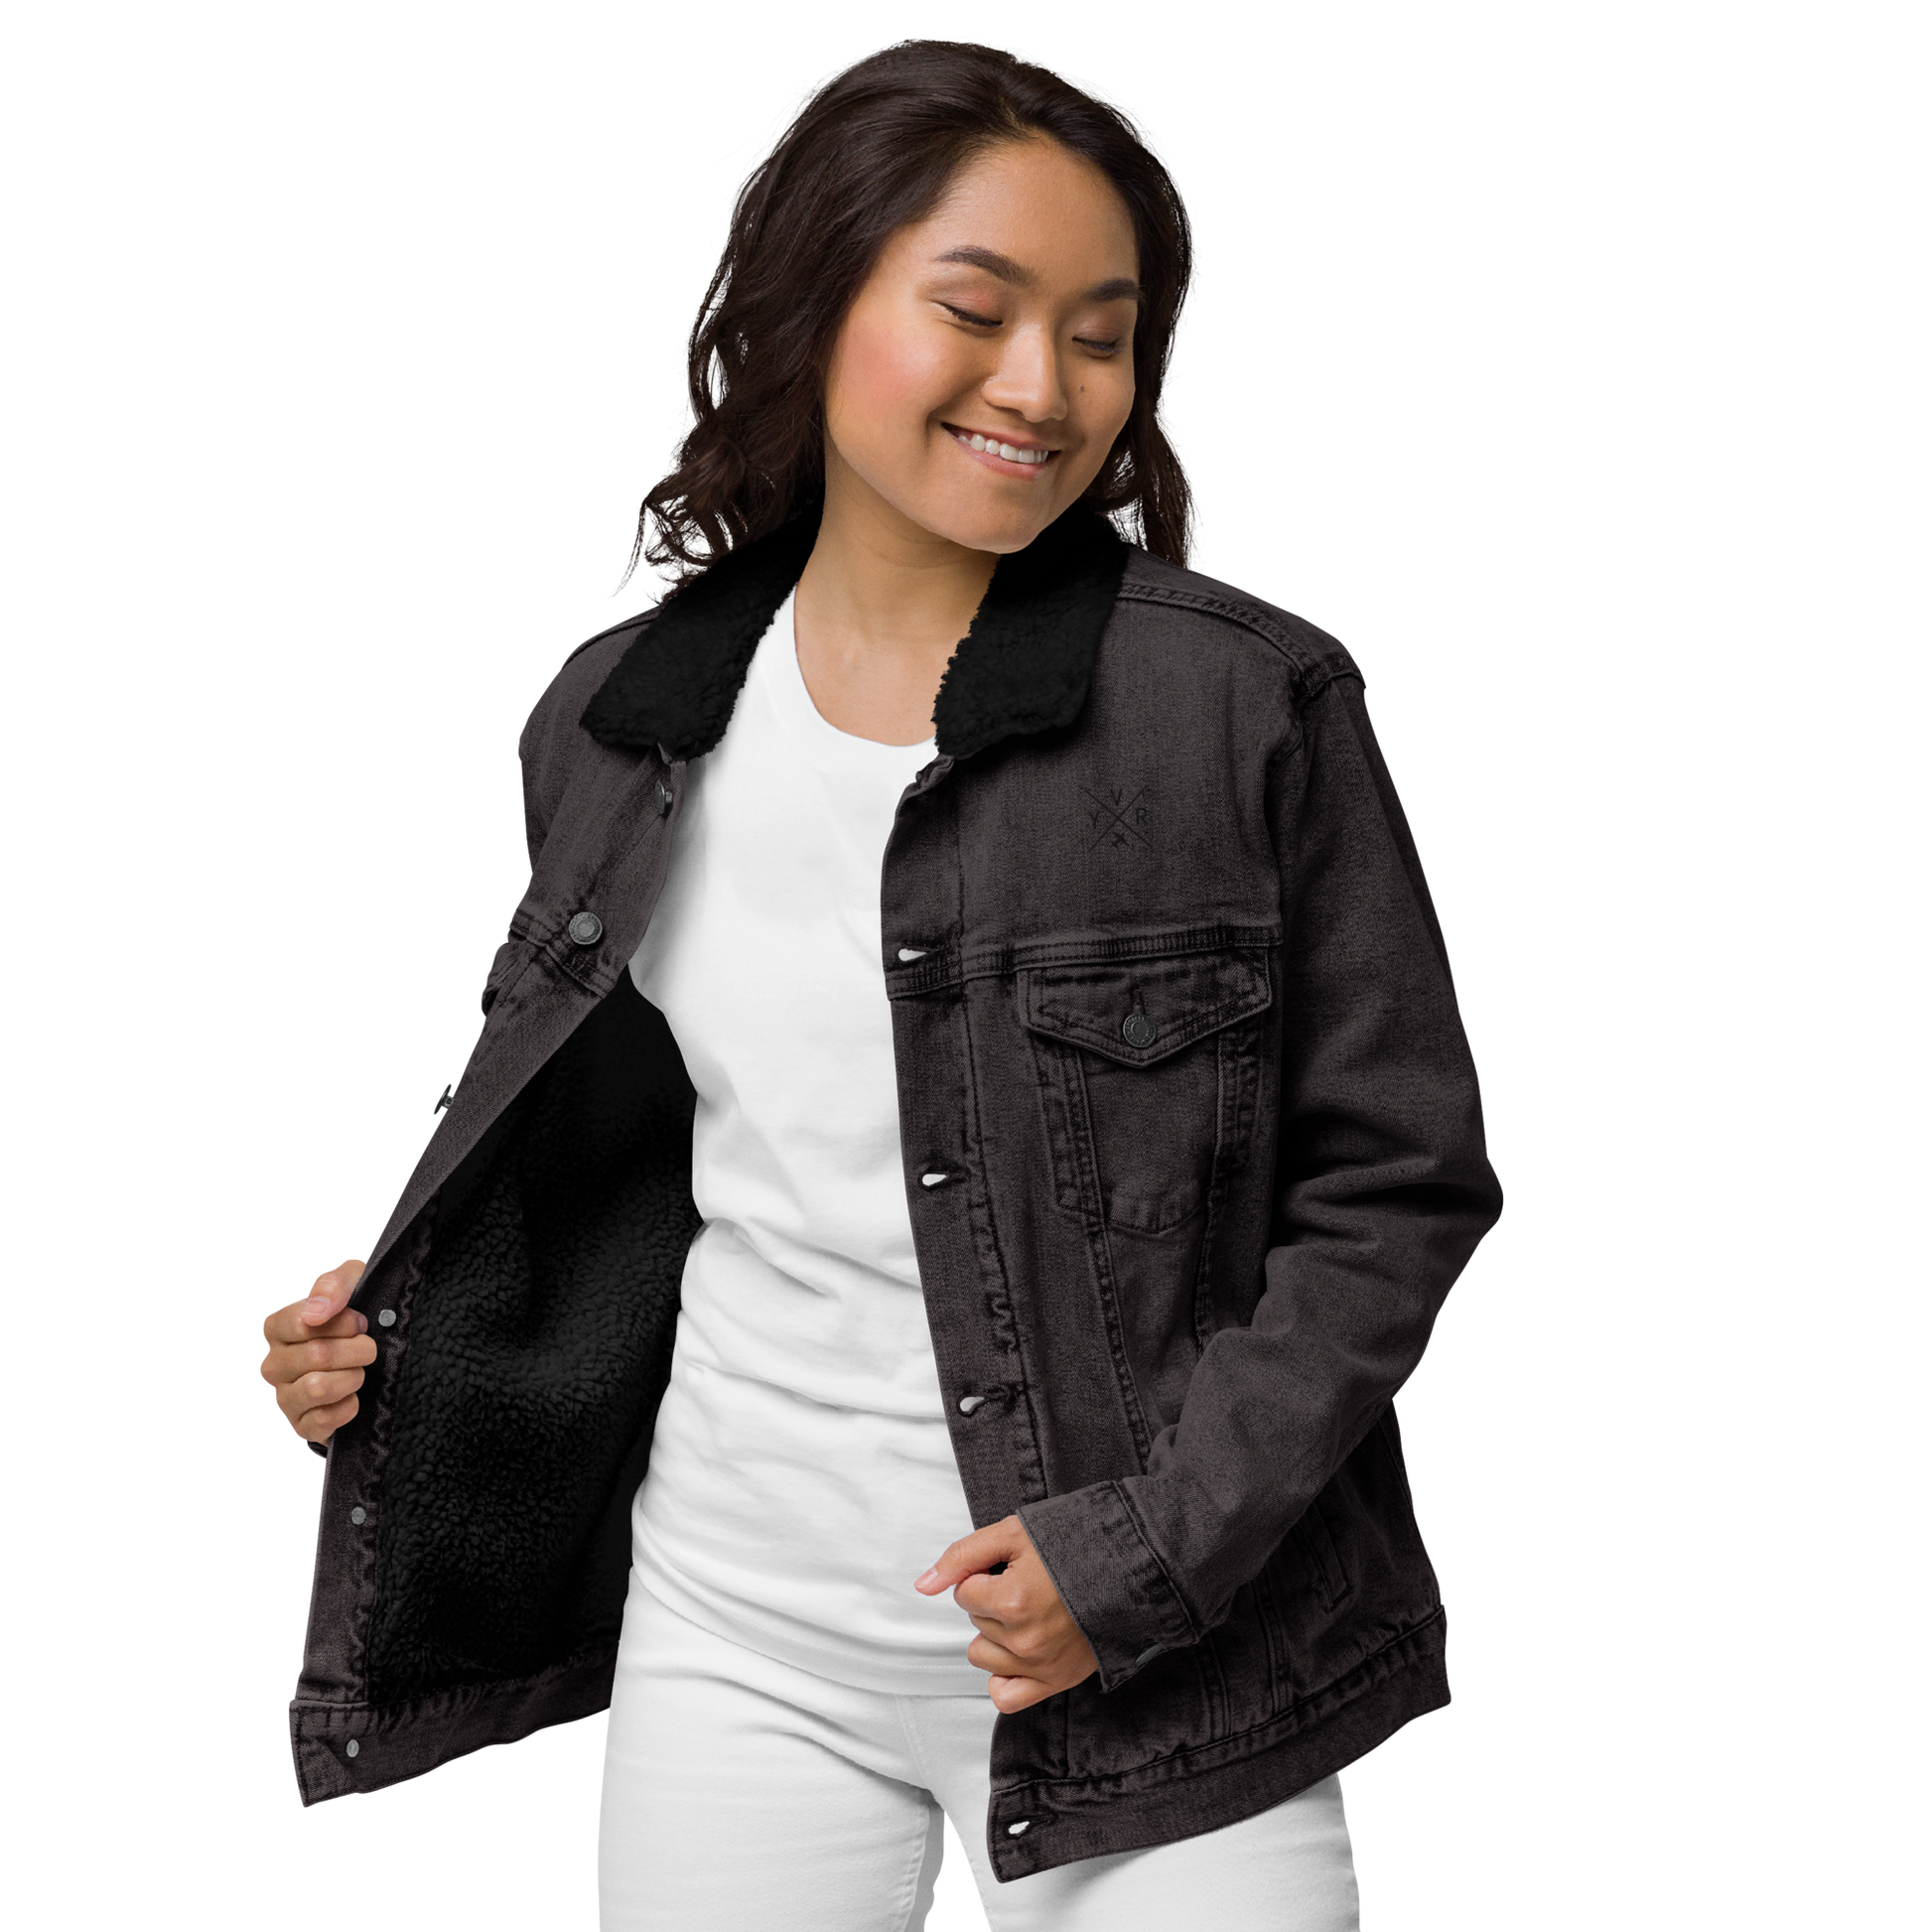 YHM Designs - YVR Vancouver Denim Sherpa Jacket - Crossed-X Design with Airport Code and Vintage Propliner - Black & White Embroidery - Image 05